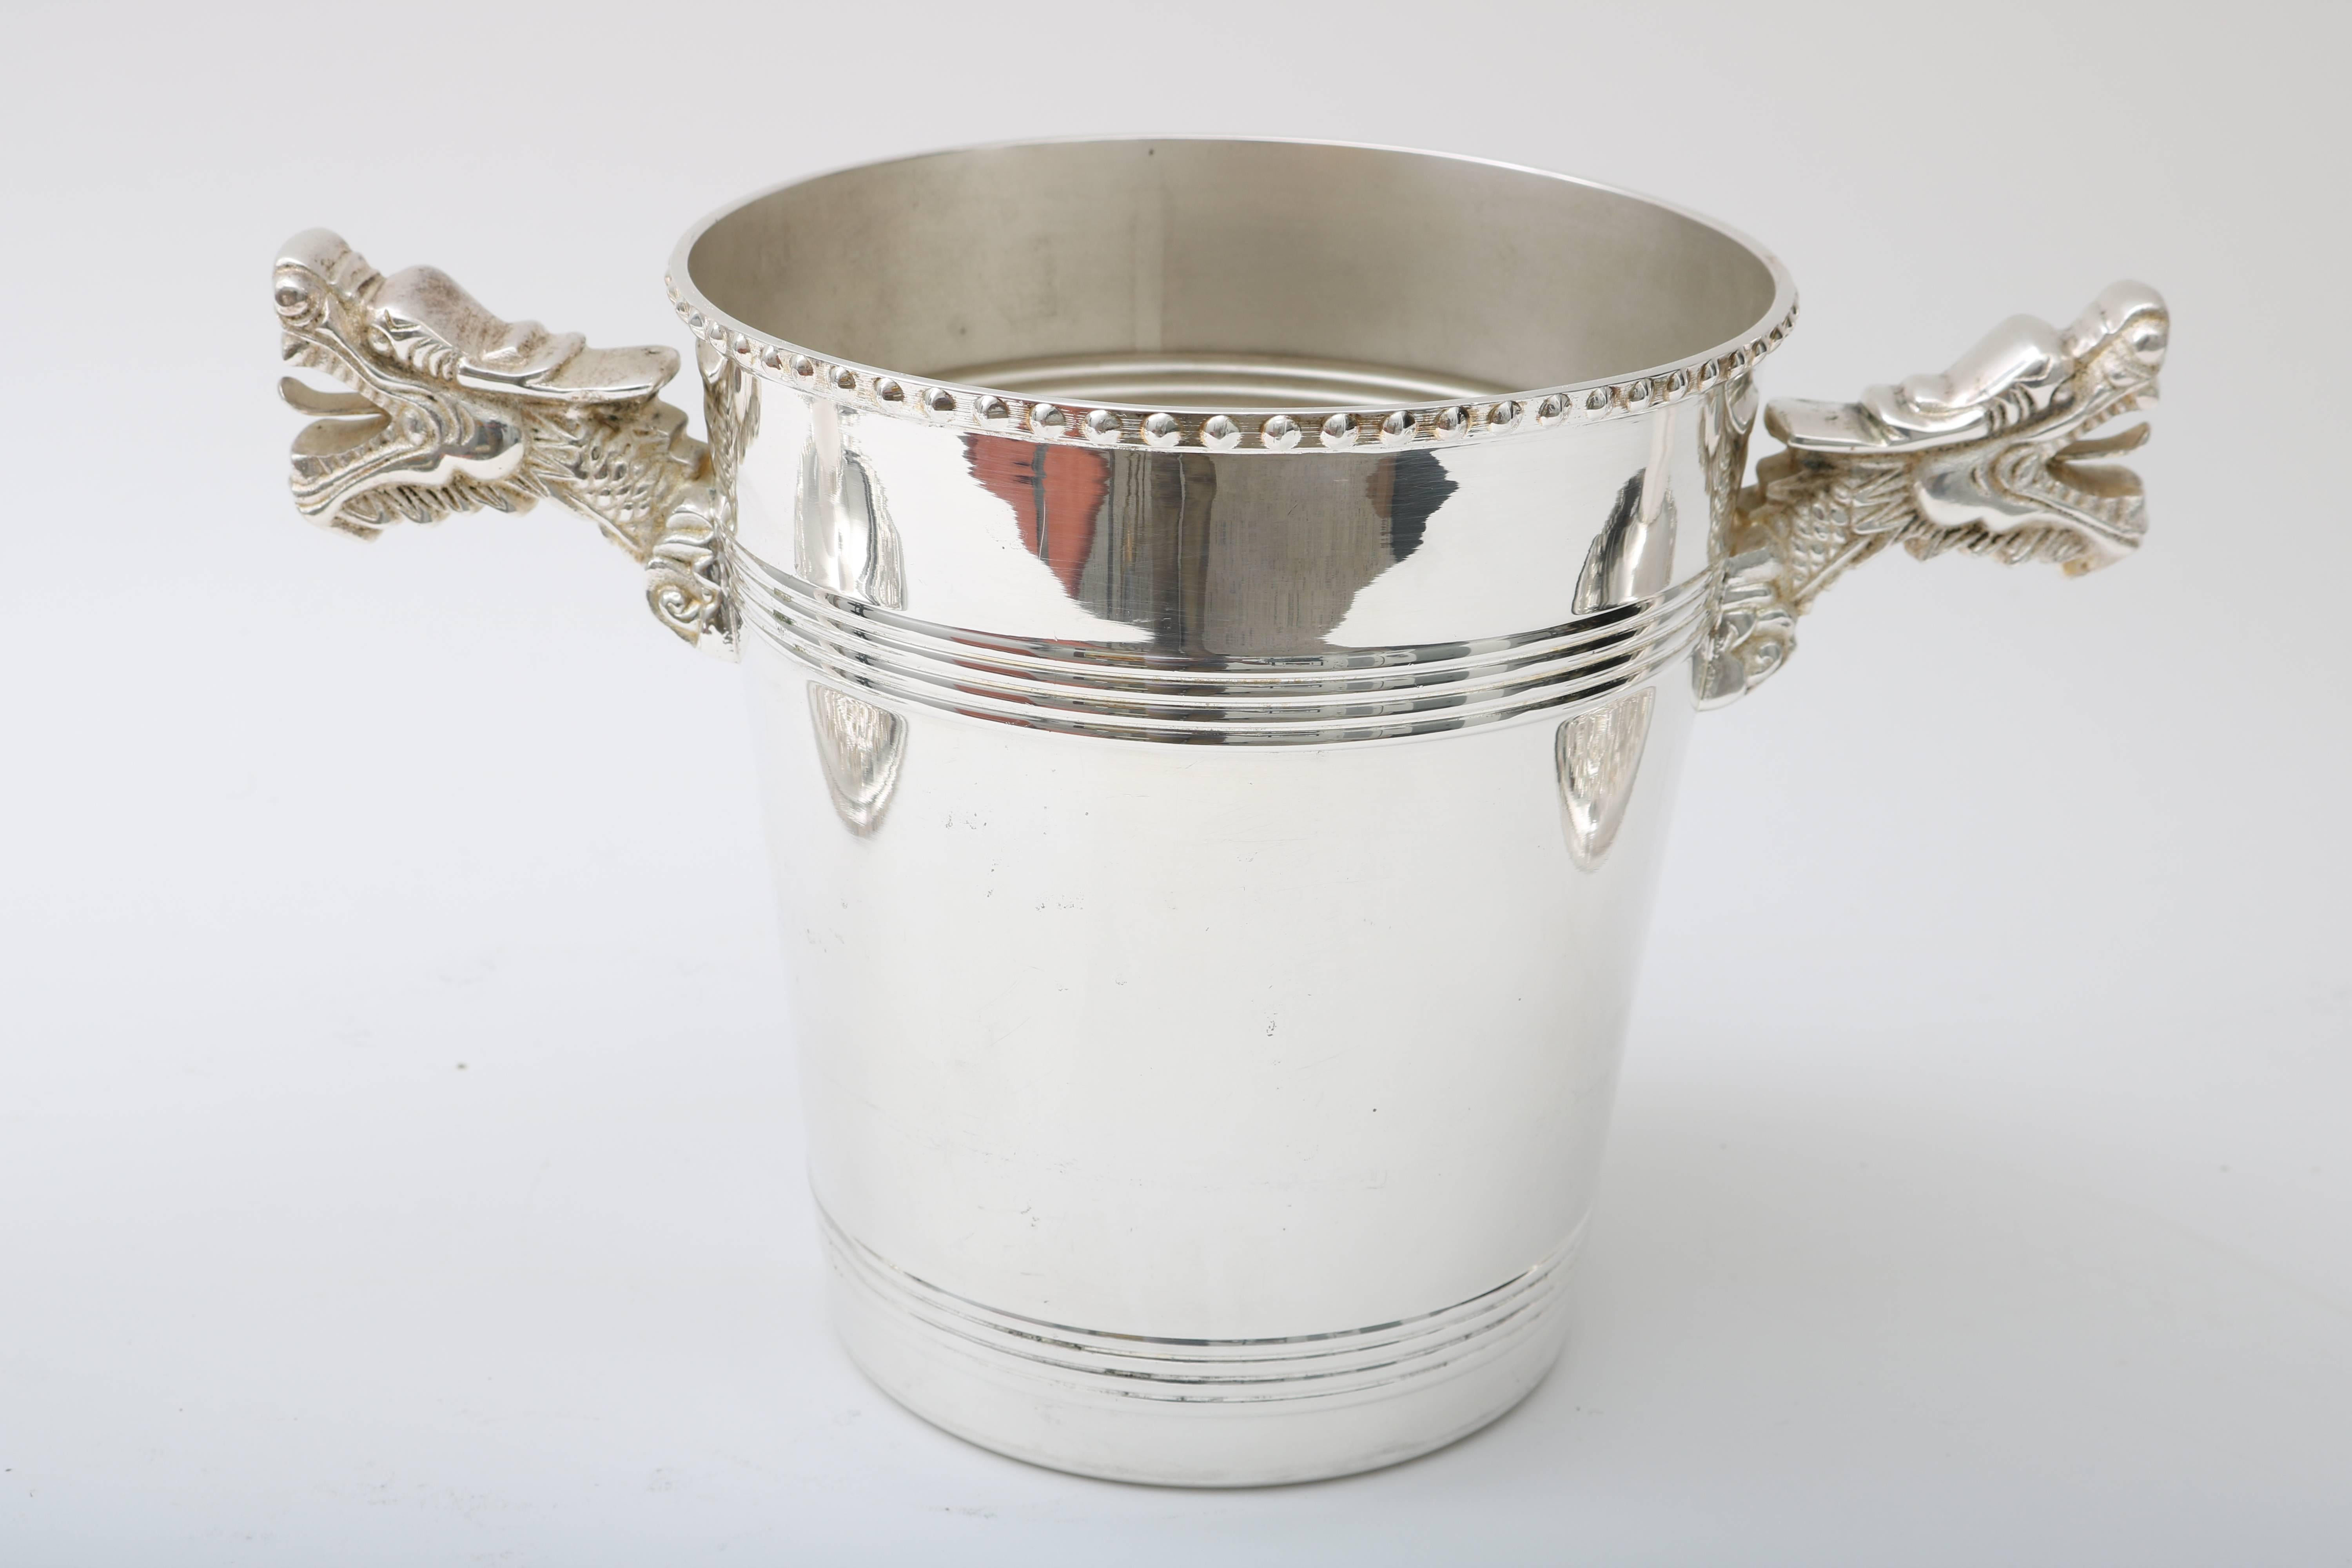 This stylish and extravagant pair of champagne buckets were recently acquired in London and are very much in the style of pieces coveted by Tony Duquette with their 